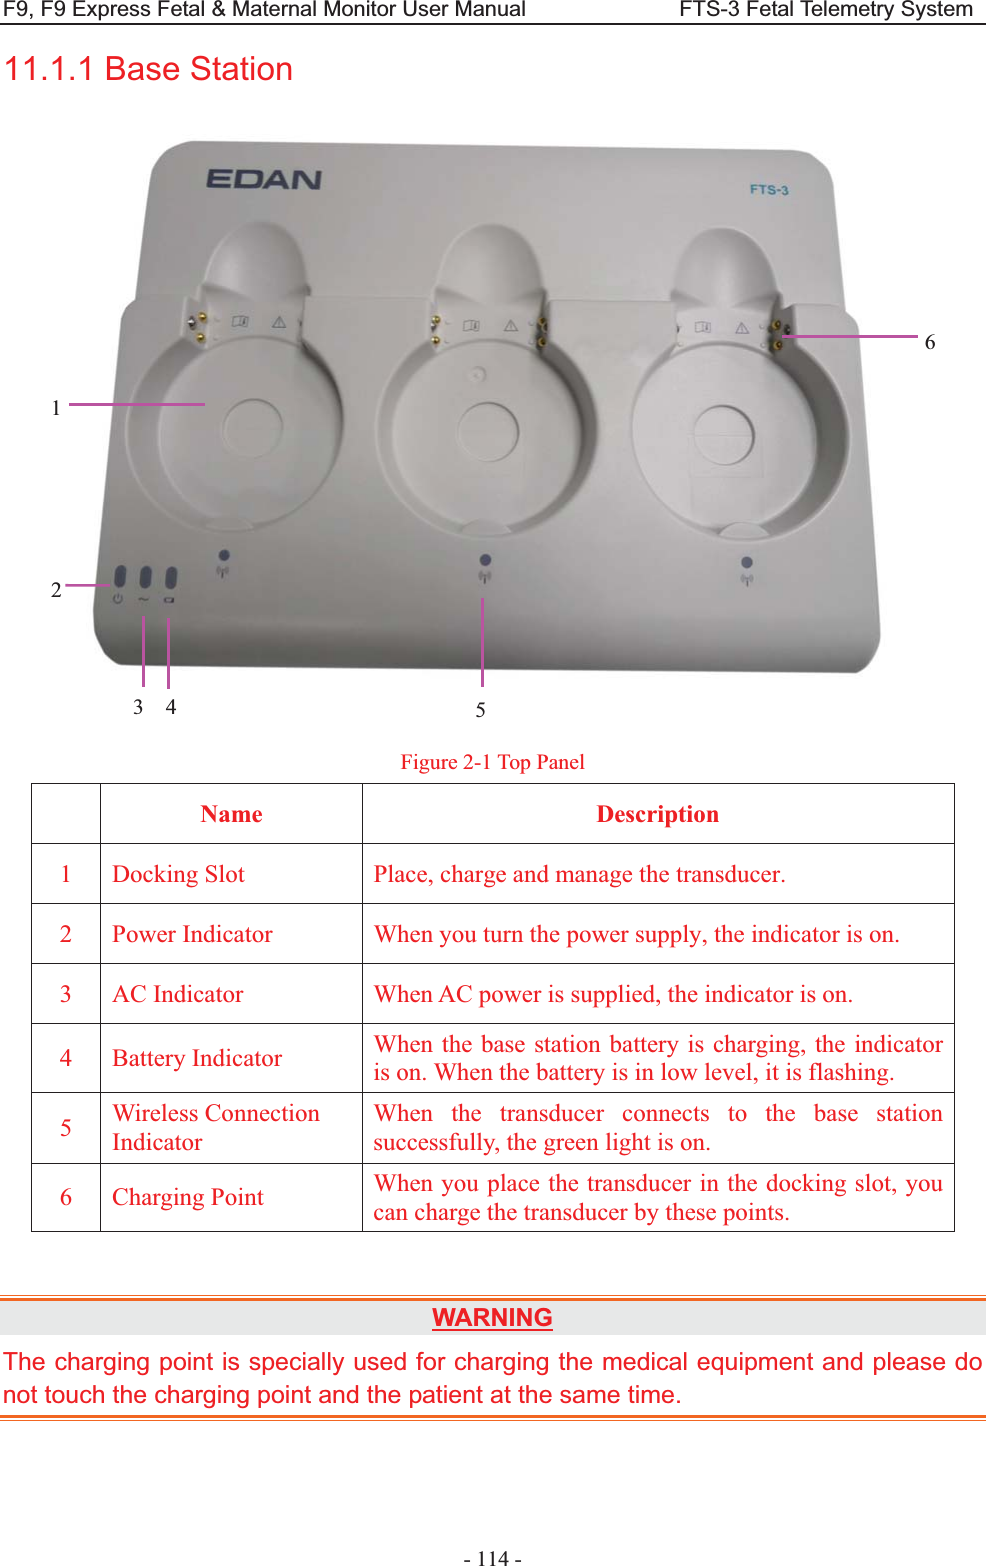 F9, F9 Express Fetal &amp; Maternal Monitor User Manual                            FTS-3 Fetal Telemetry System - 114 - 11.1.1 Base Station   Figure 2-1 Top Panel  Name  Description 1  Docking Slot  Place, charge and manage the transducer.   2  Power Indicator  When you turn the power supply, the indicator is on. 3  AC Indicator  When AC power is supplied, the indicator is on. 4 Battery Indicator  When the base station battery is charging, the indicator is on. When the battery is in low level, it is flashing. 5  Wireless Connection Indicator  When the transducer connects to the base station successfully, the green light is on.   6 Charging Point  When you place the transducer in the docking slot, you can charge the transducer by these points.  WARNINGThe charging point is specially used for charging the medical equipment and please do not touch the charging point and the patient at the same time.  1 2 3  4  5 6 